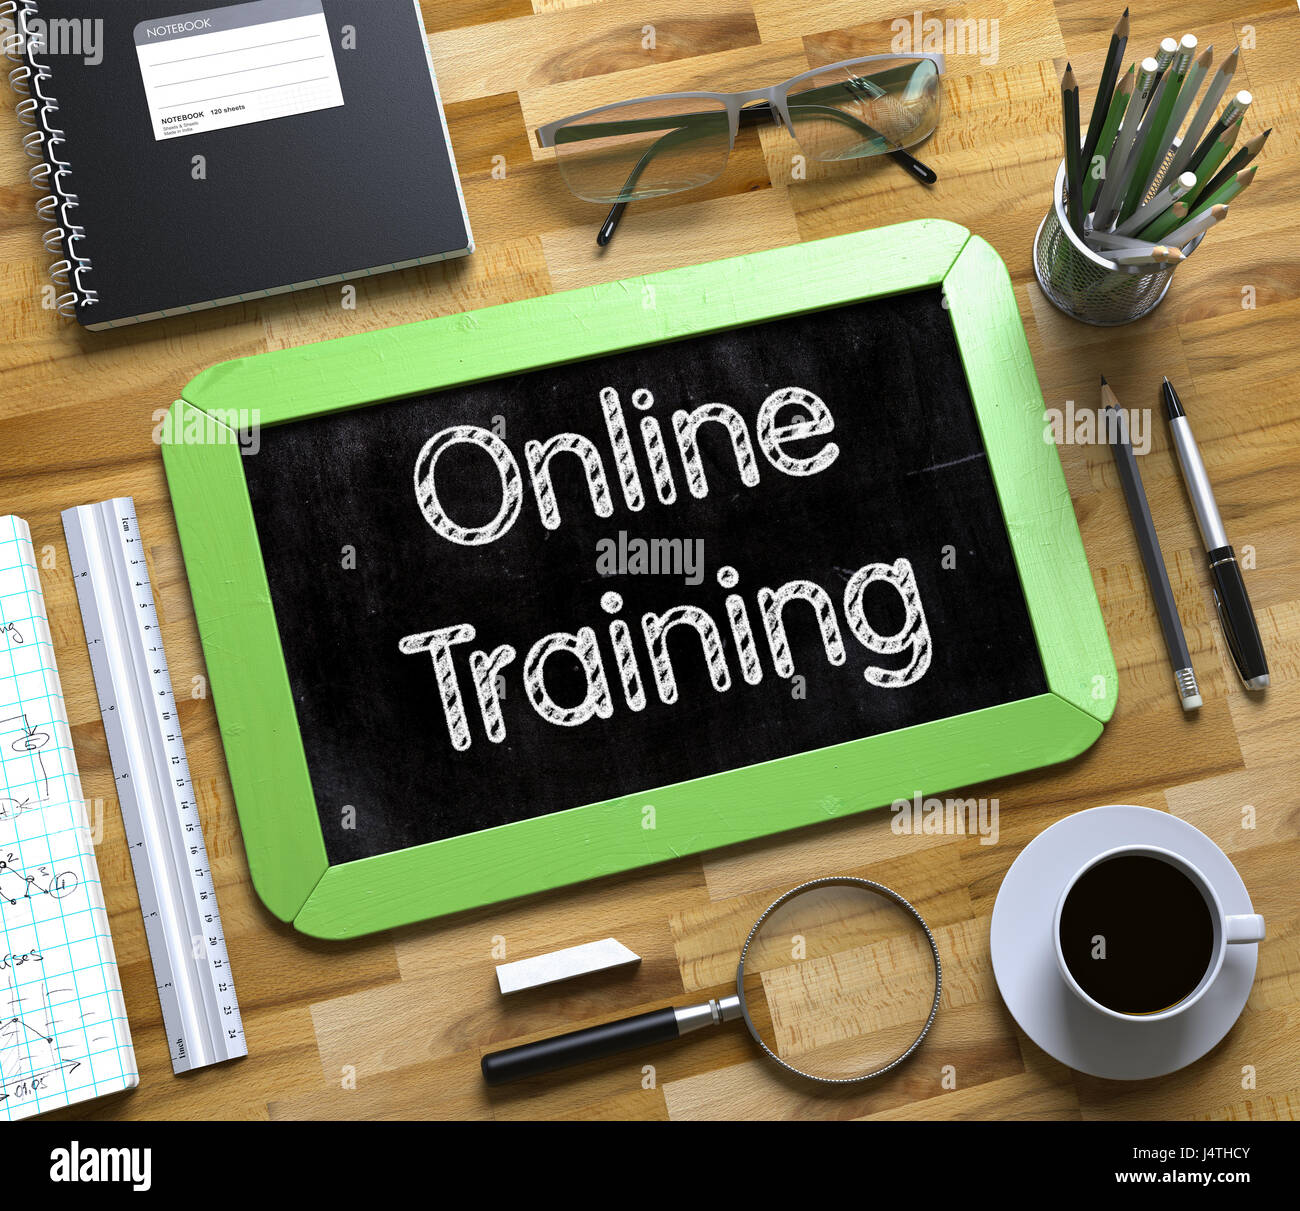 Online Training on Small Chalkboard. 3D. Stock Photo